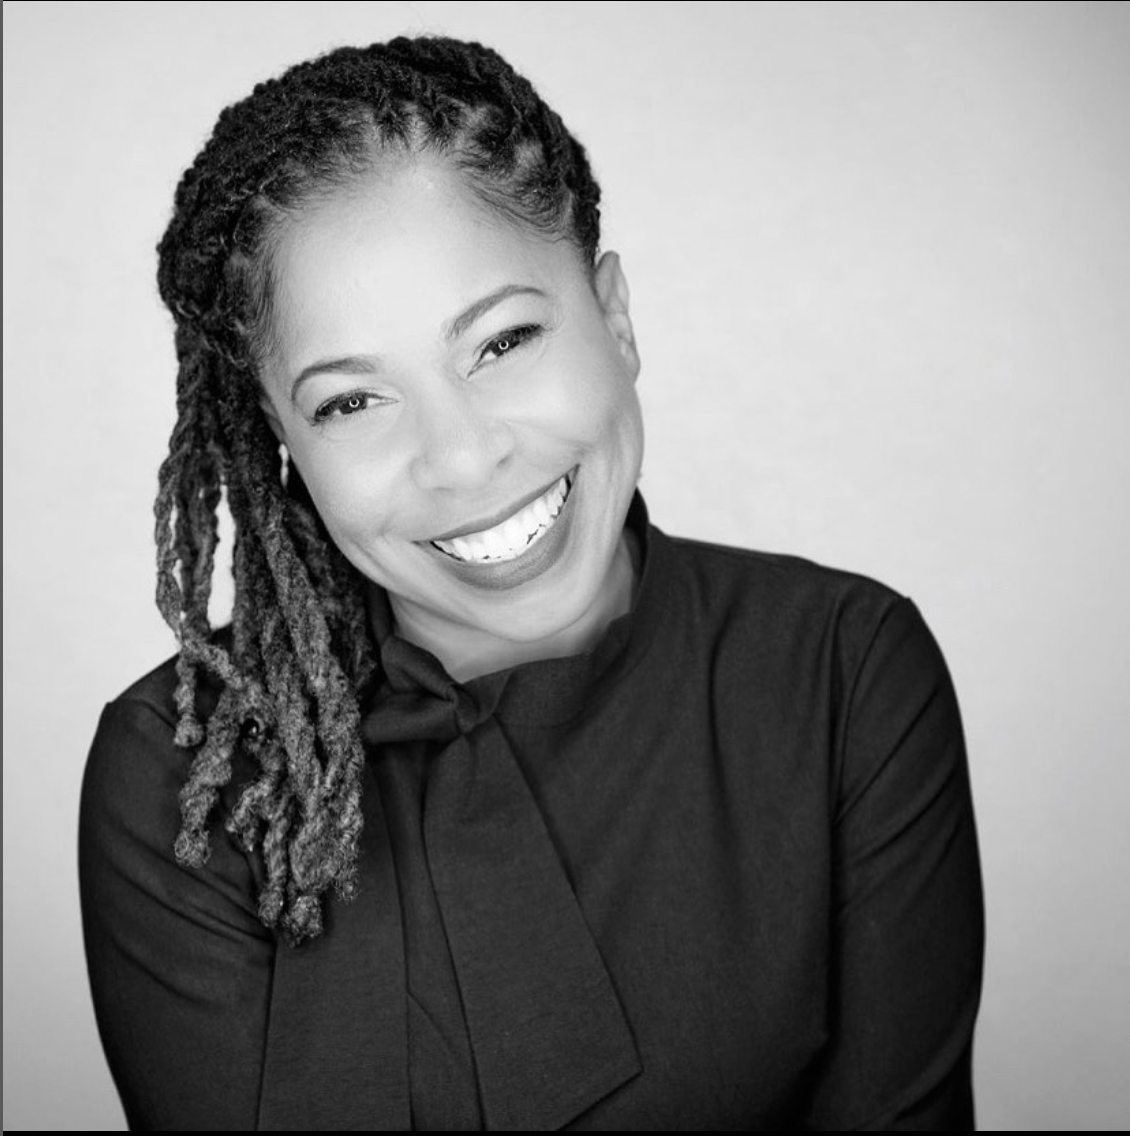 A woman with dreadlocks is smiling in a black and white photo, liz Toussaint, life coach,  life coach training, the coaching guild